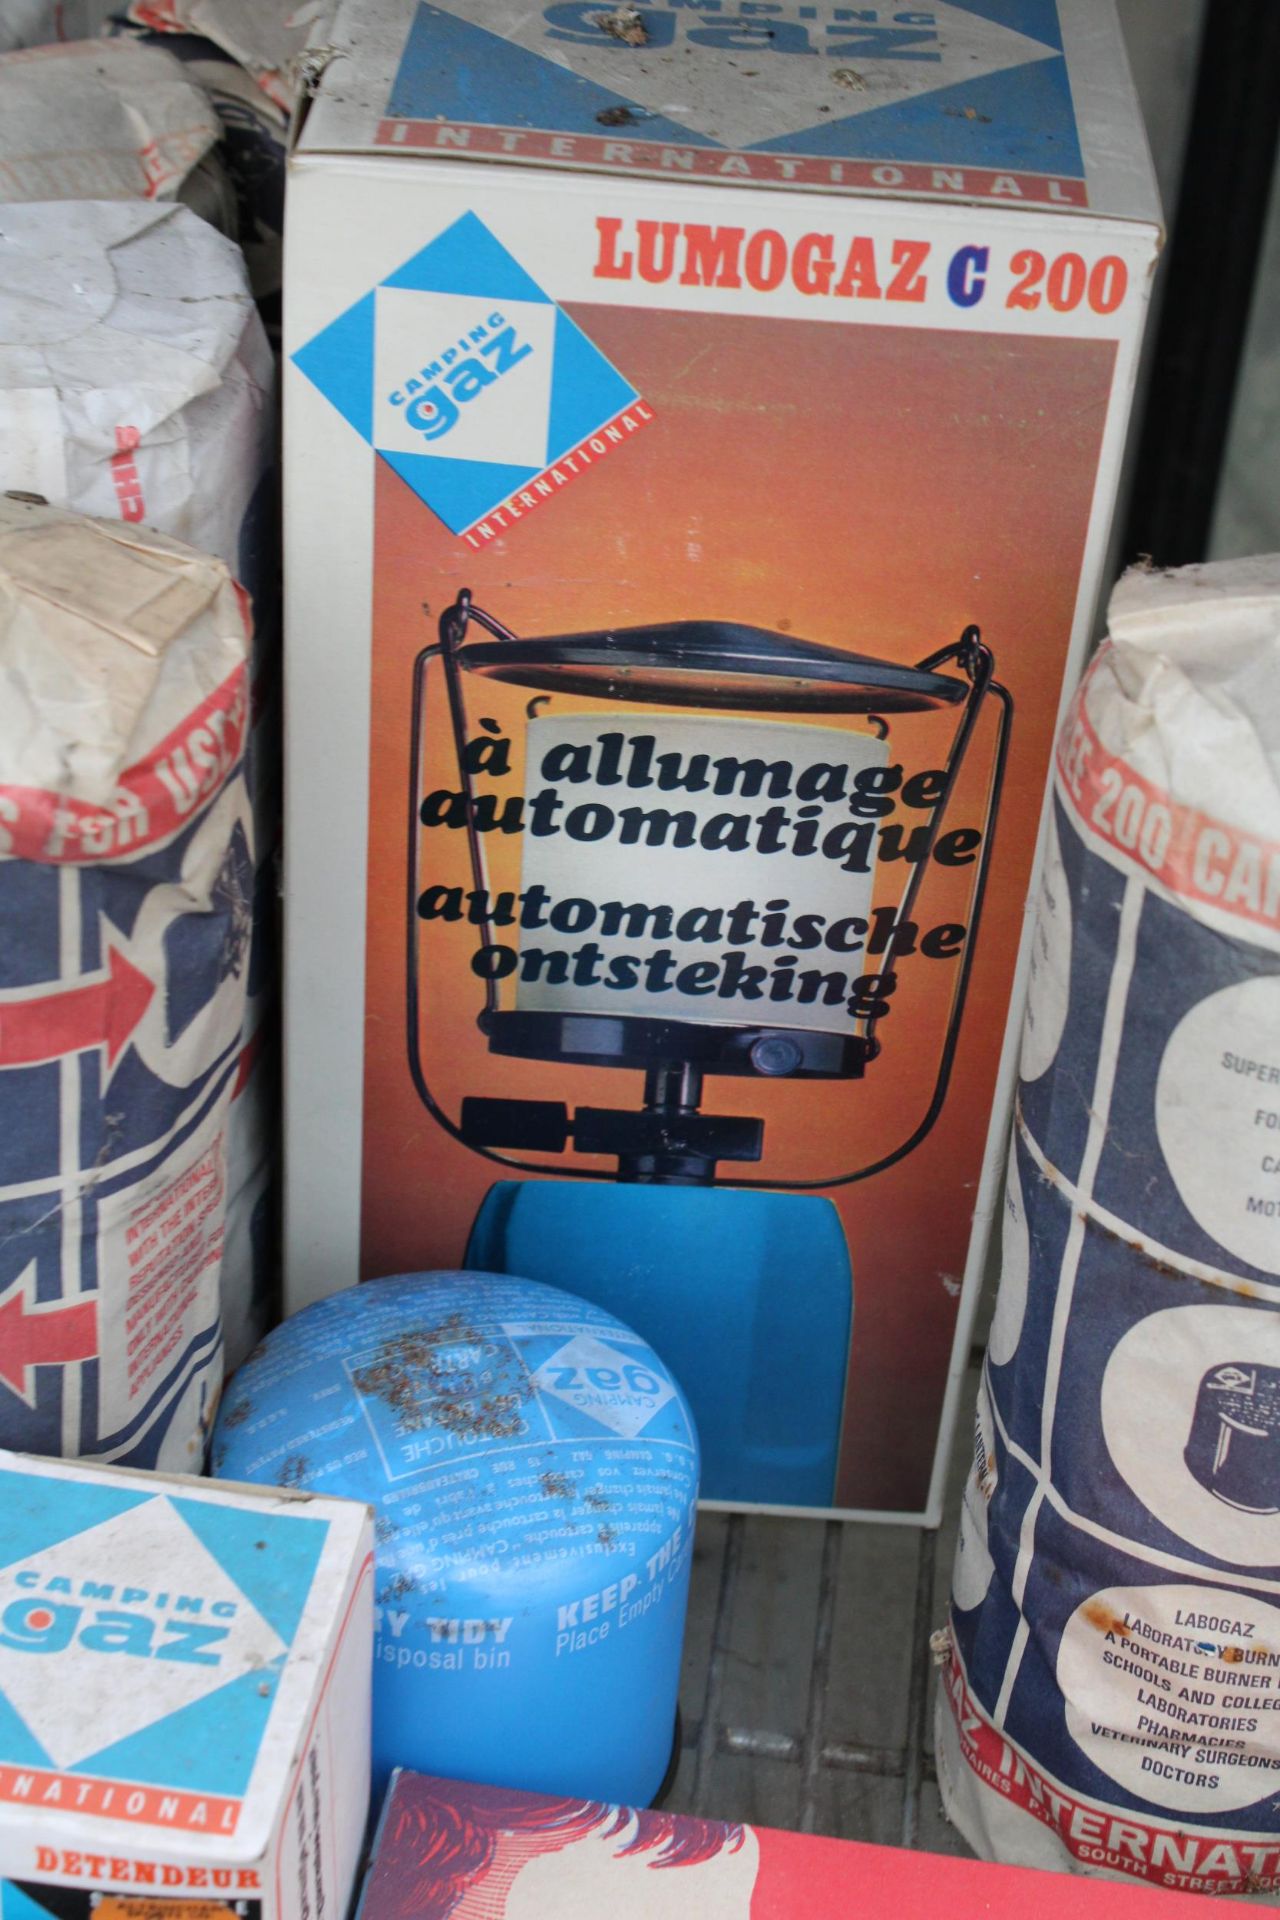 A CAMPING GAZ STOVE, A CAMPING GAZ LIGHT AND A LARGE QUANTITY OF CAMPING GAZ CANISTERS - Bild 2 aus 2